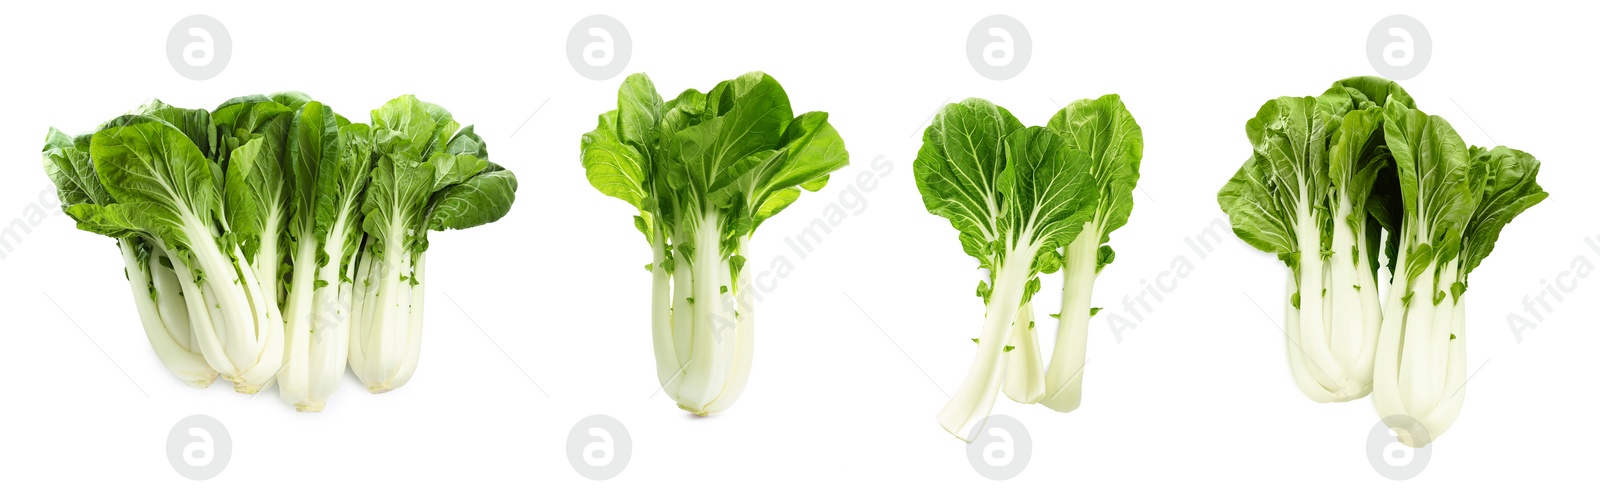 Image of Collage with fresh pak choy cabbages and leaves on white background